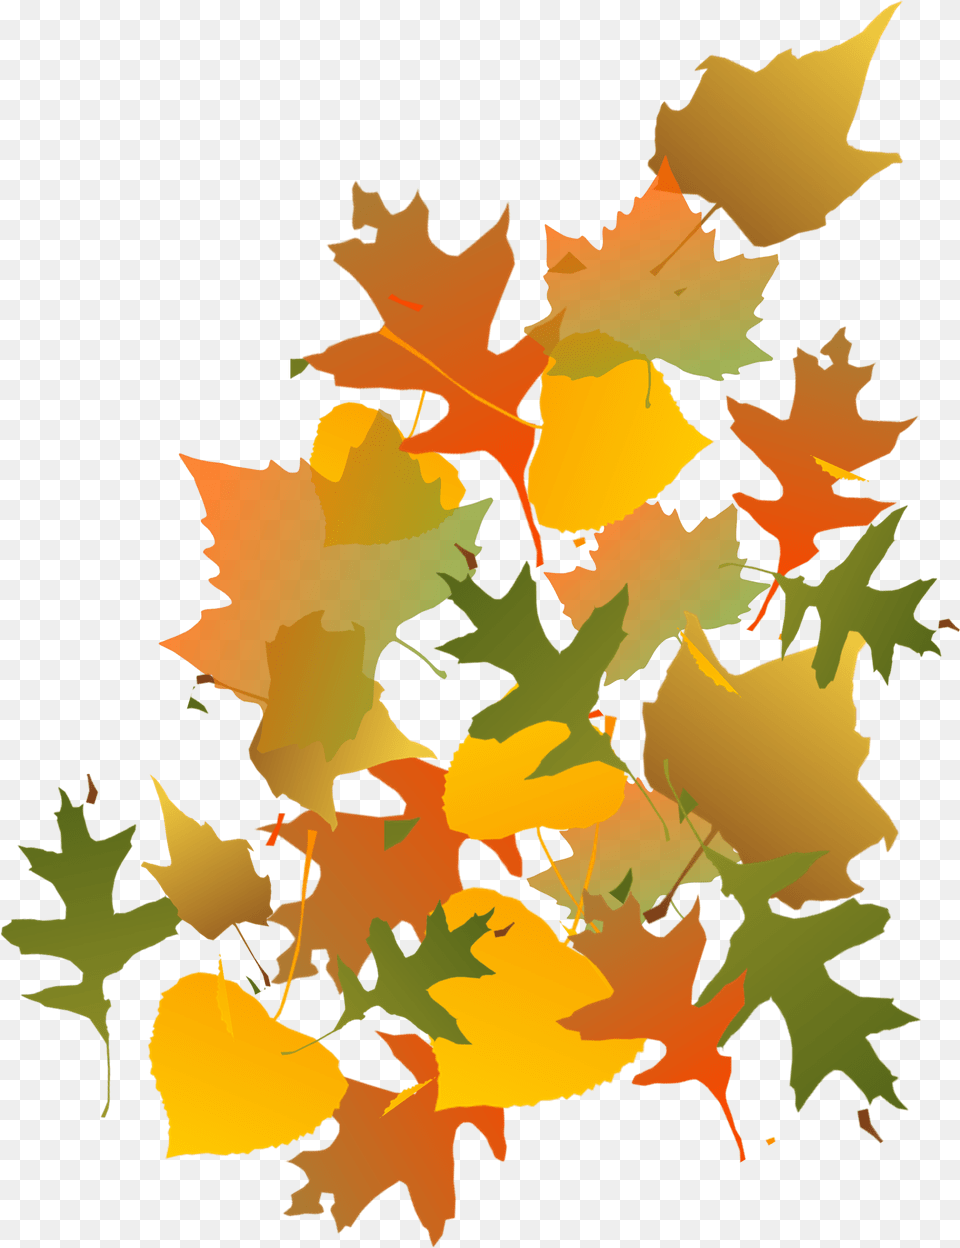 Fall Leaves Image Autumn Leaves Clip Art, Leaf, Plant, Tree, Maple Free Png Download